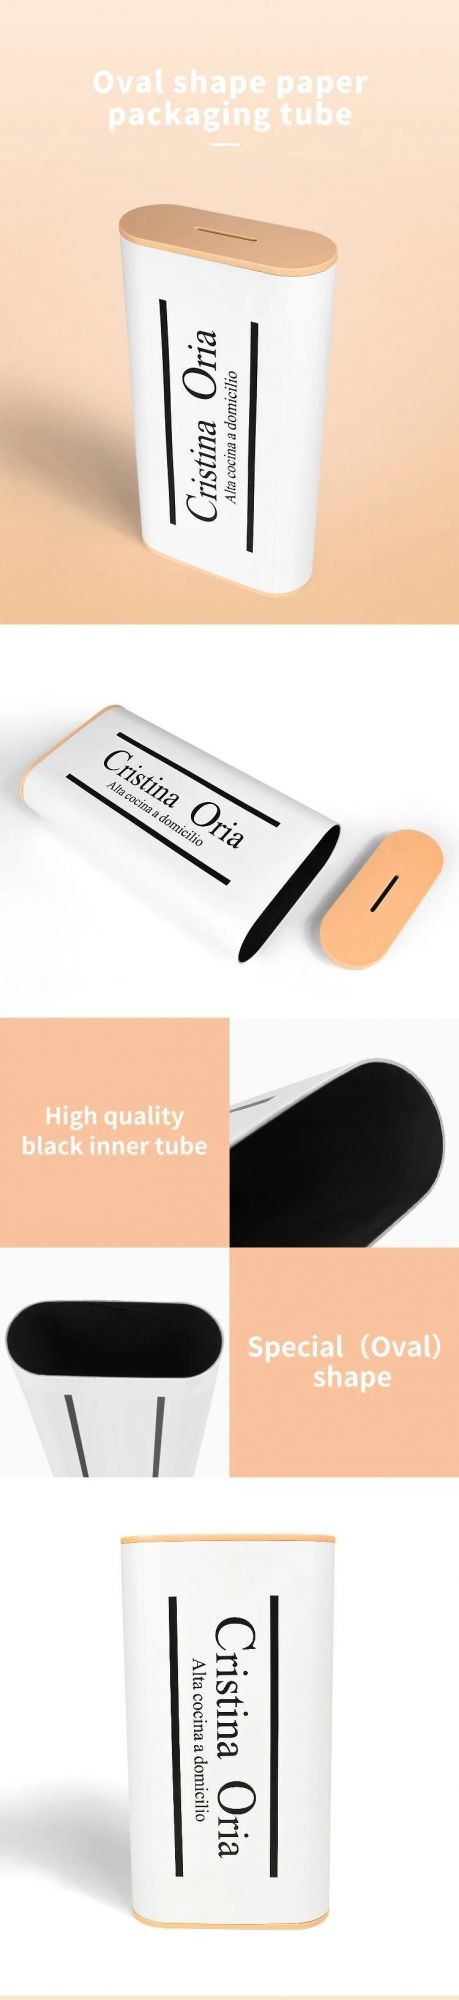 2020 New Style Oval Shape Packaging Tube